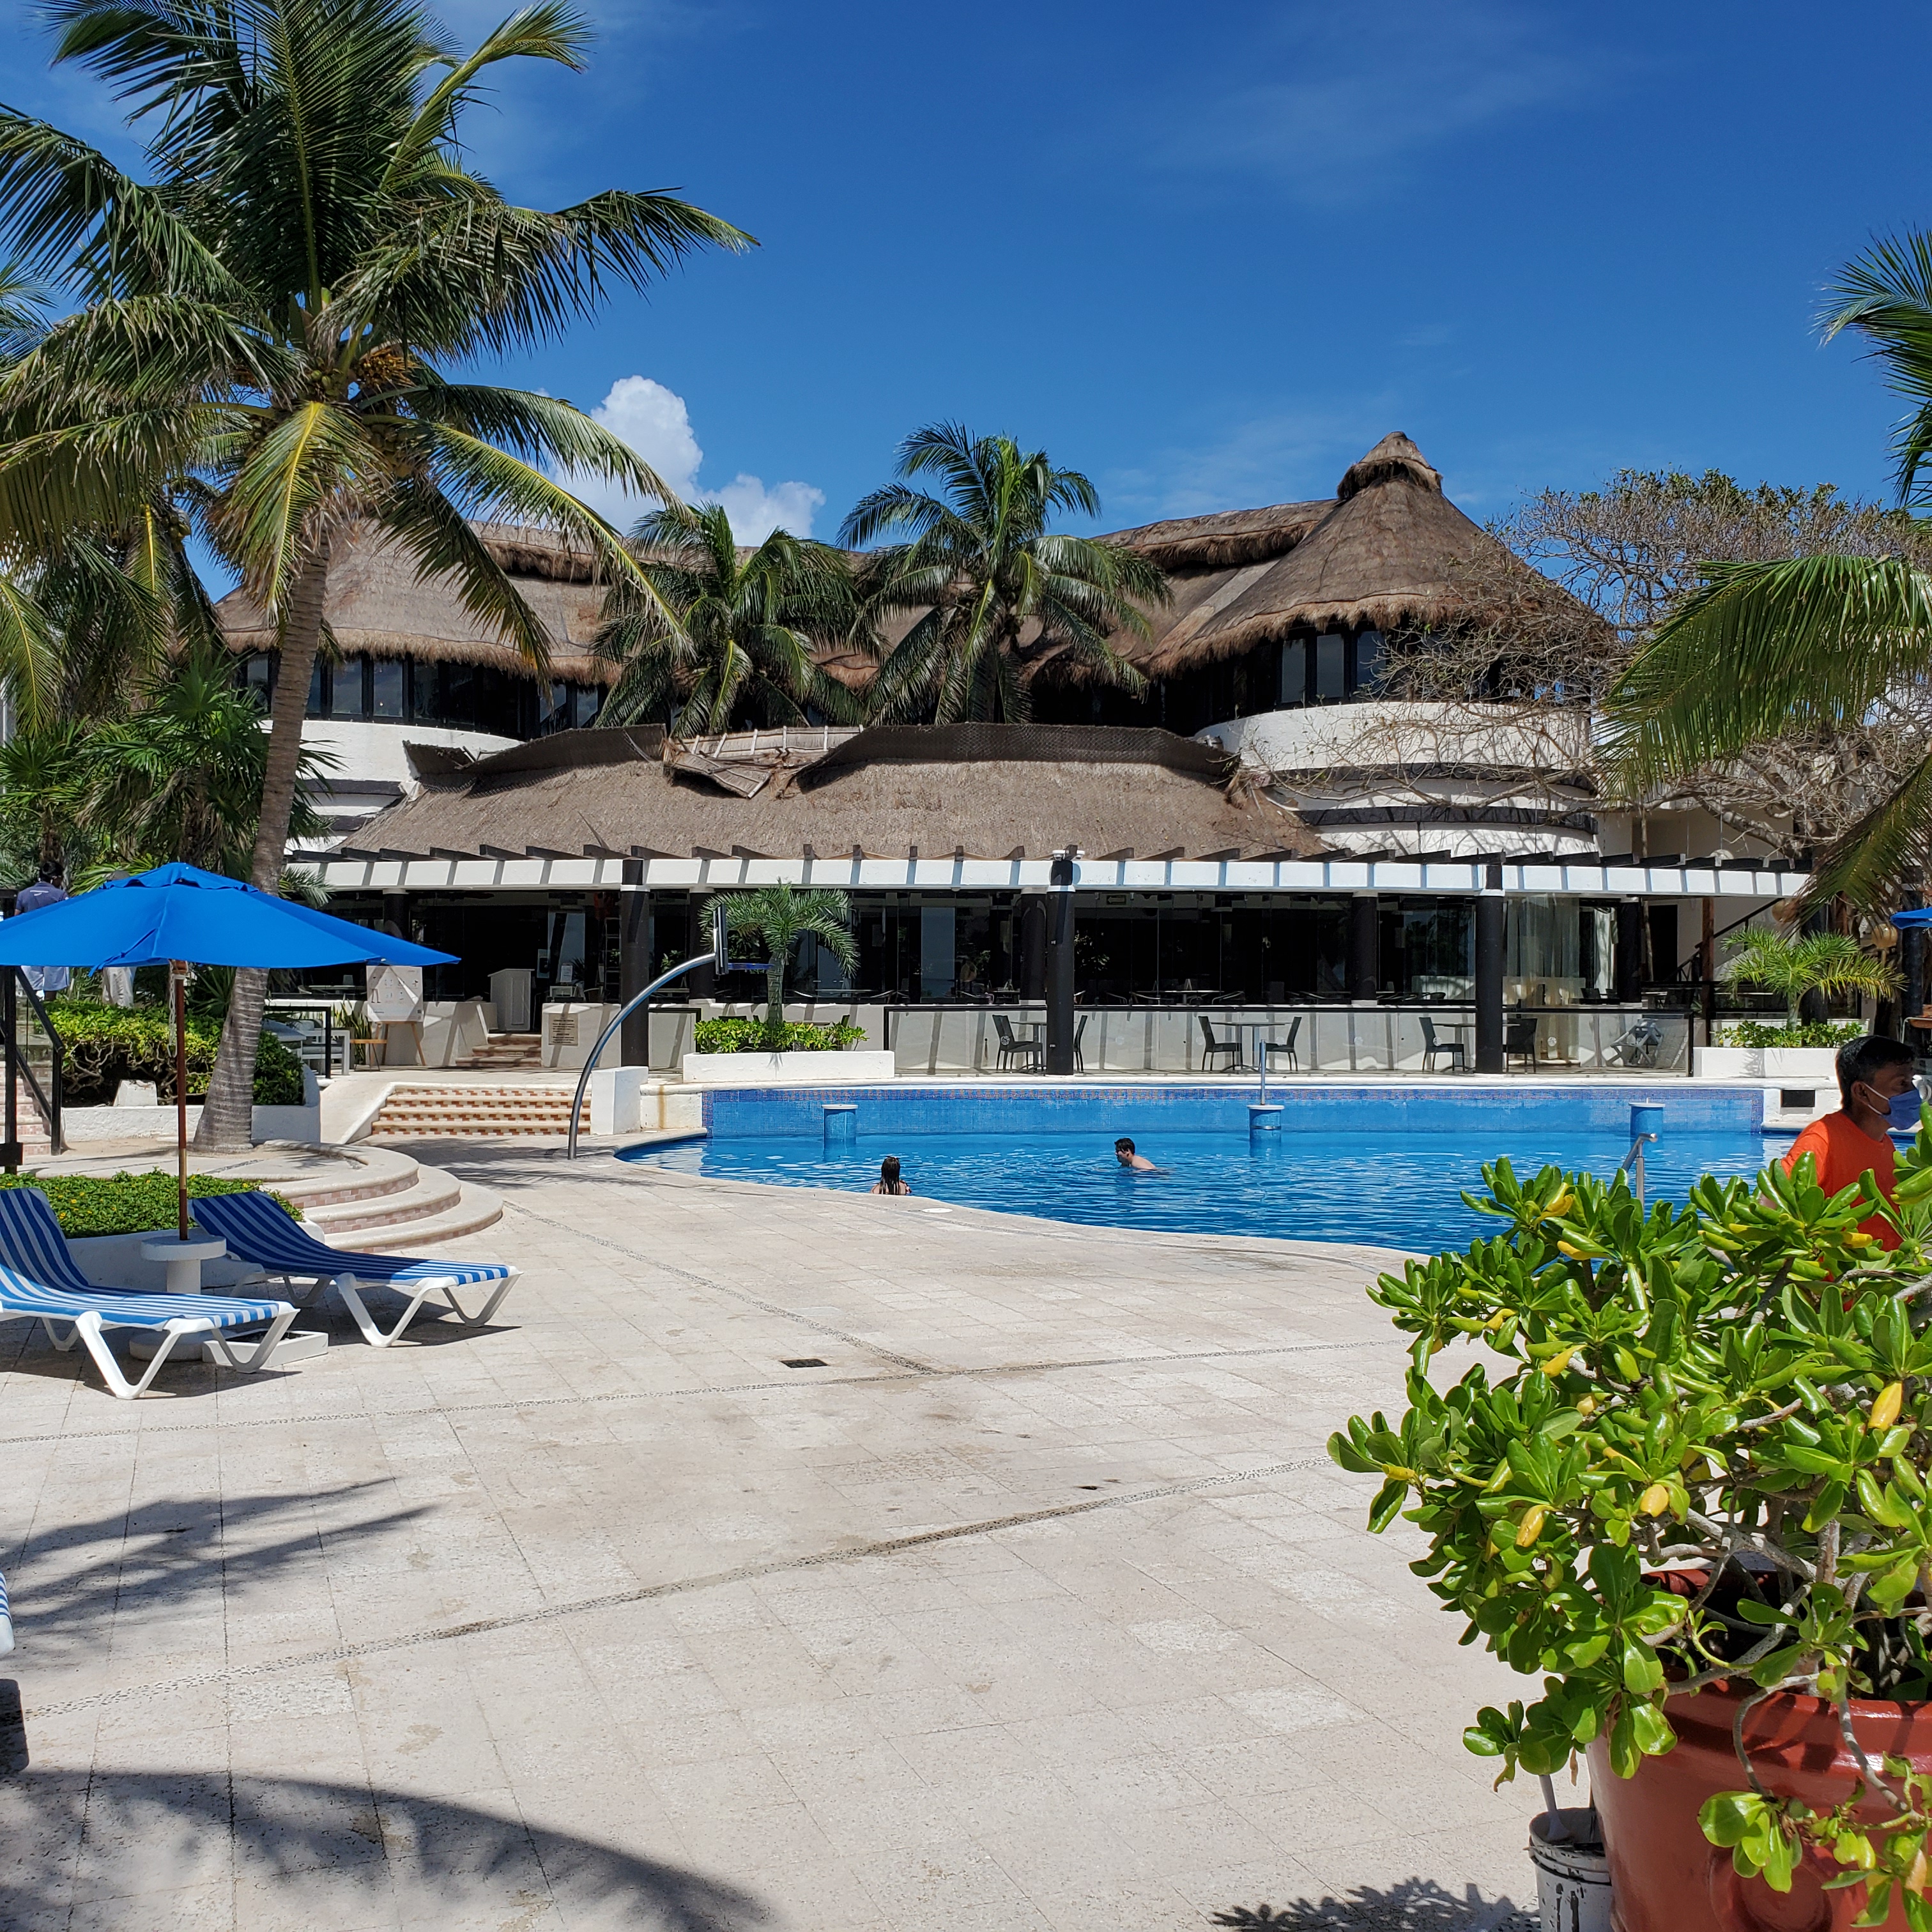 Picture of a place: The Reef Playacar